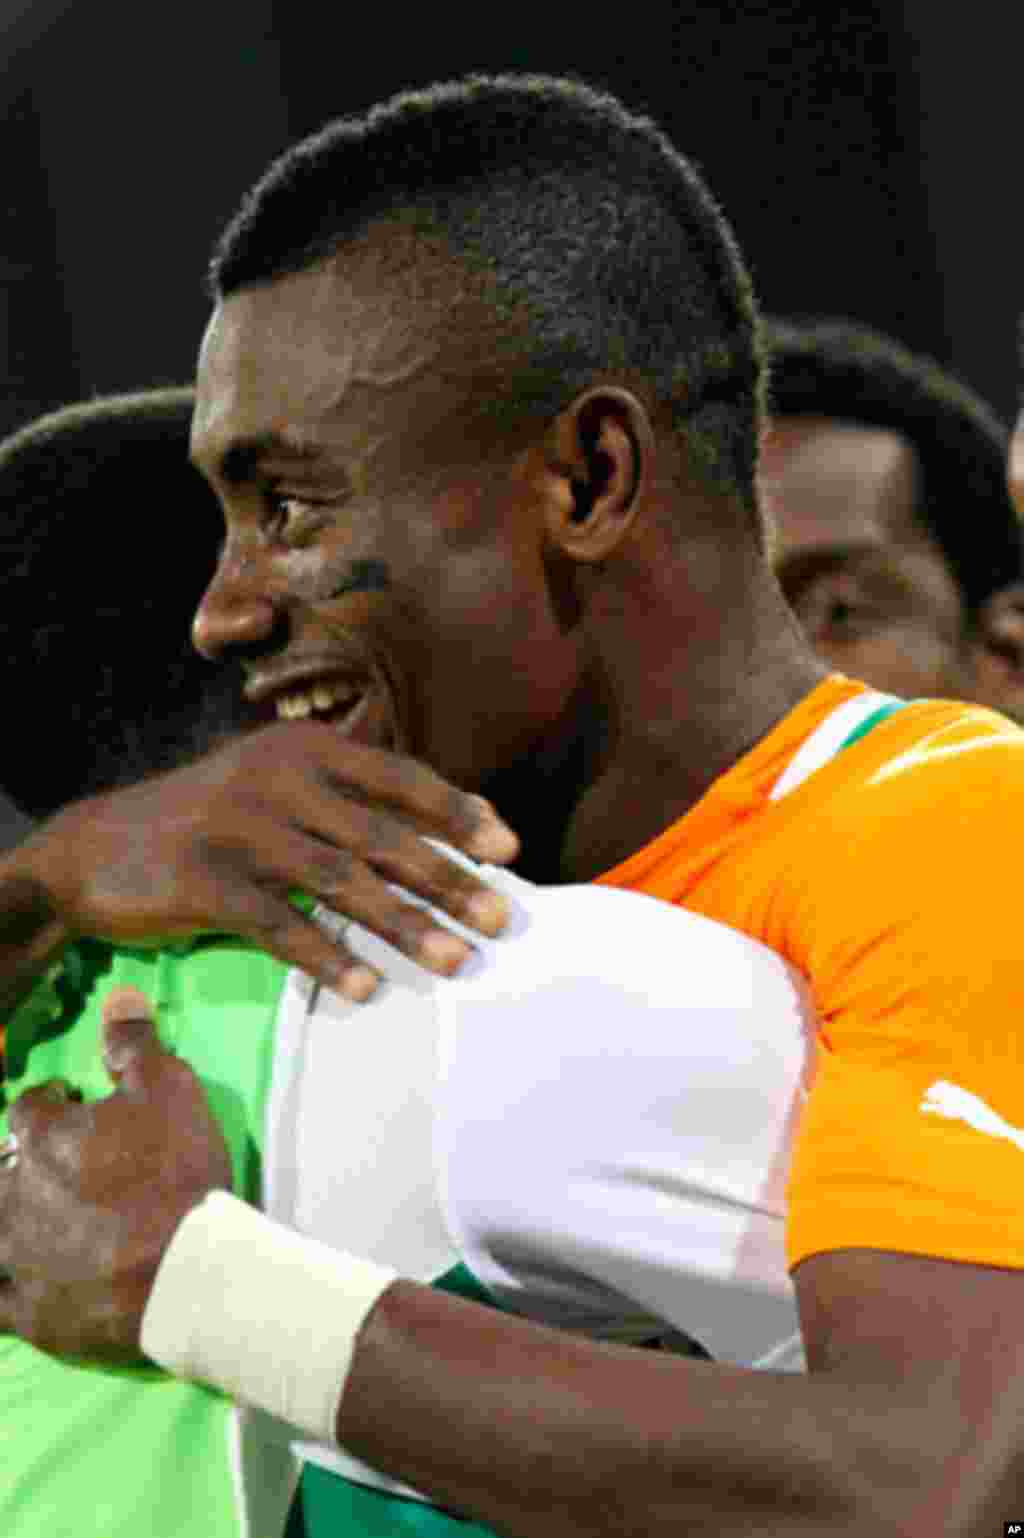 Kalou of Ivory Coast celebrates after scoring against Burkina Faso during their African Nations Cup soccer match in Malabo